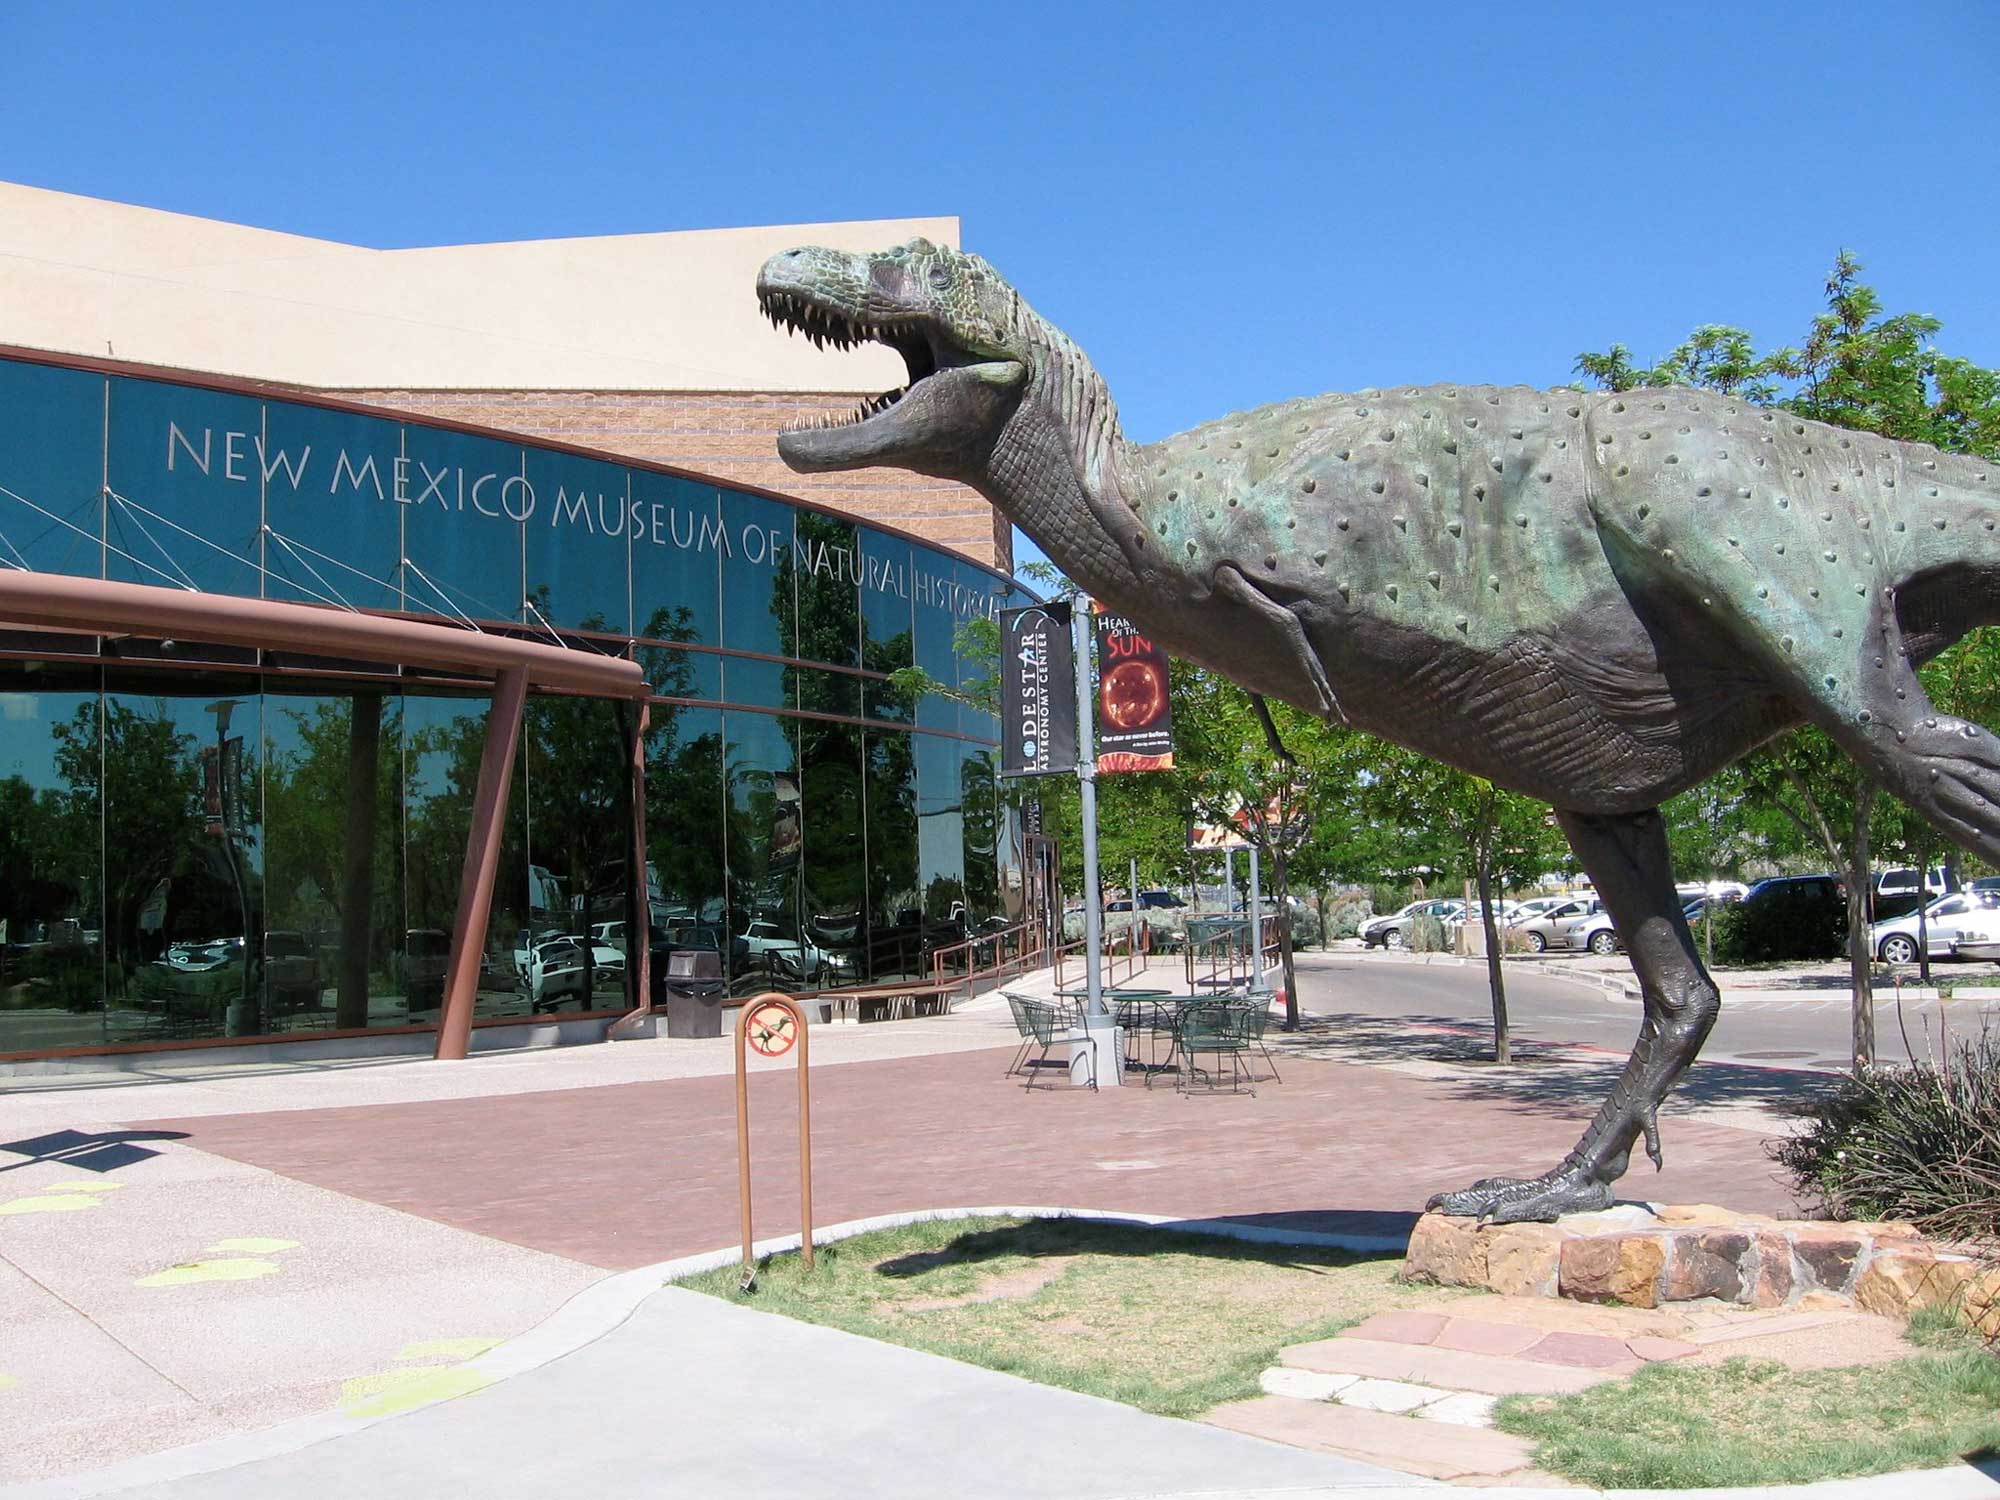 Photograph of the exterior of the New Mexico Museum of Natural History and Science.